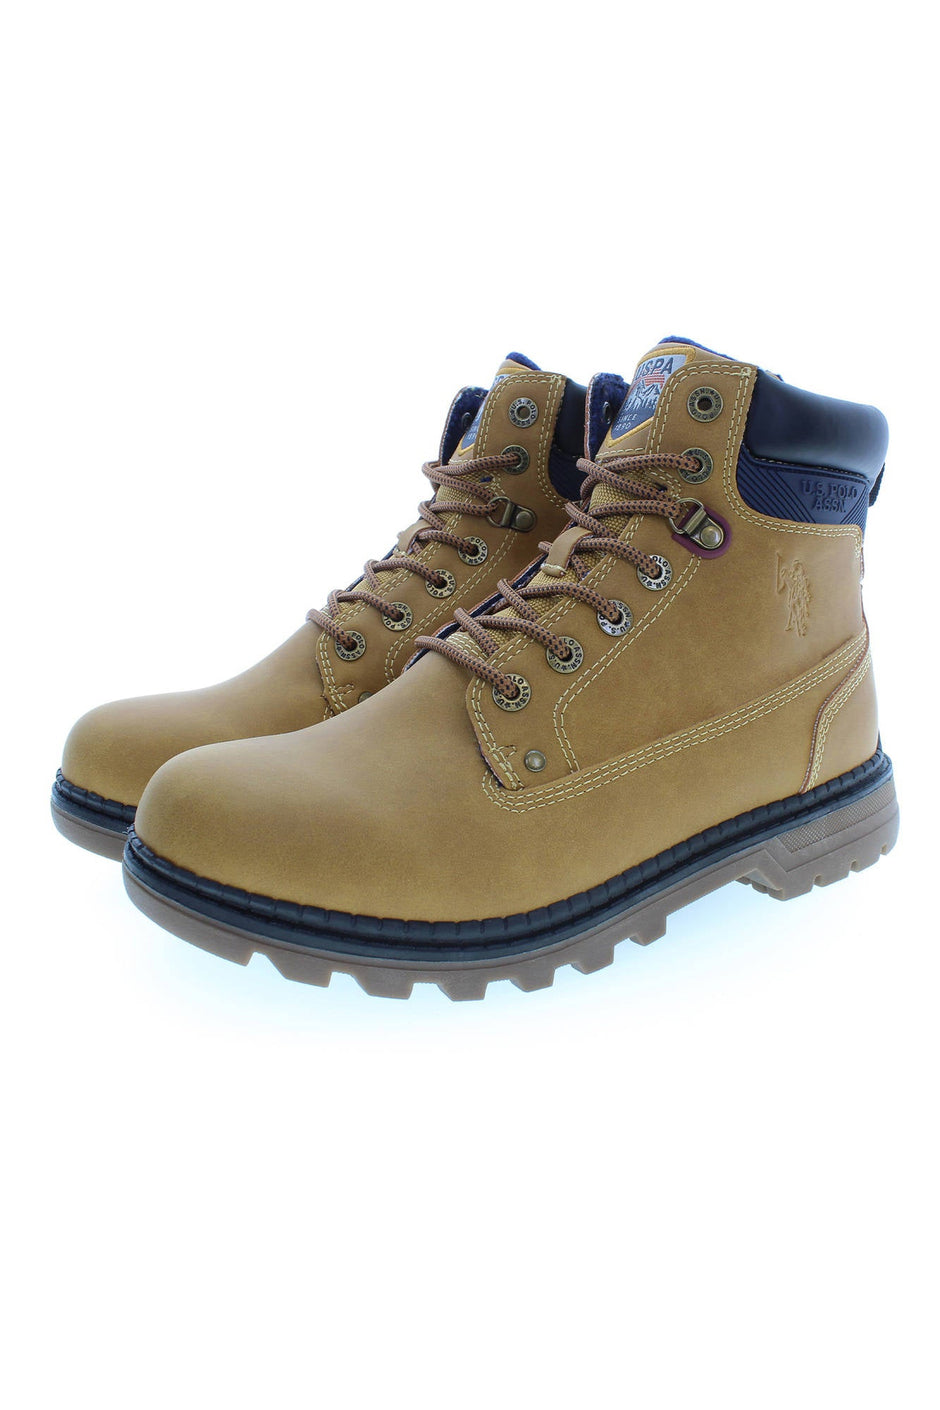 U.S. Polo Best Price Beige Boots for Men - Outland Gear